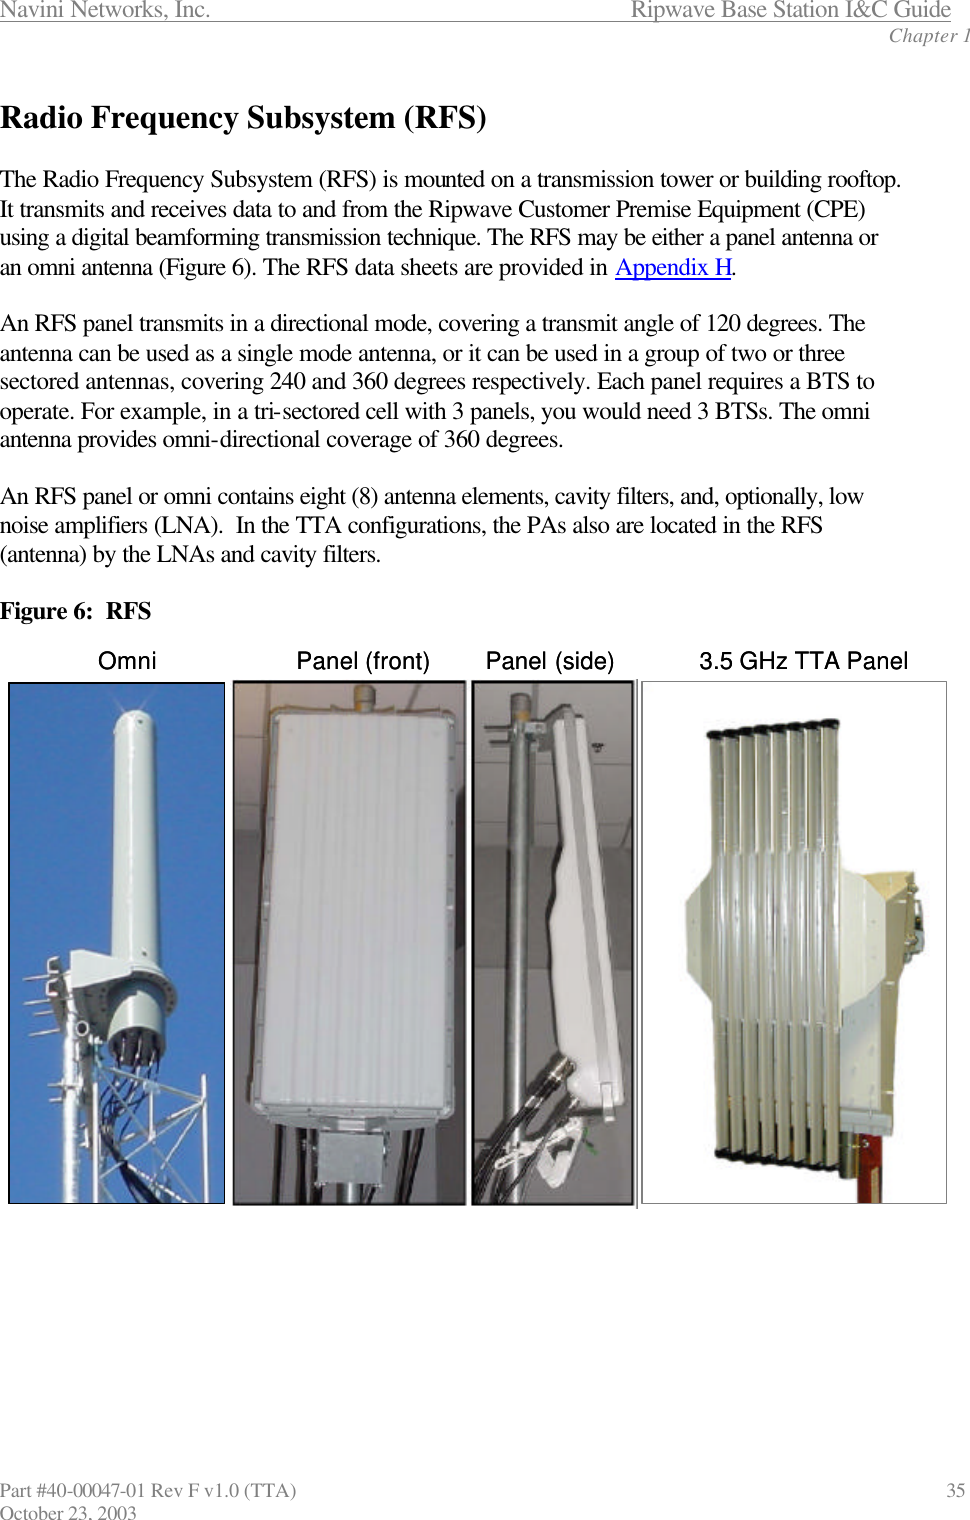 Navini Networks, Inc.                      Ripwave Base Station I&amp;C Guide Chapter 1 Part #40-00047-01 Rev F v1.0 (TTA)                               35 October 23, 2003  Radio Frequency Subsystem (RFS)  The Radio Frequency Subsystem (RFS) is mounted on a transmission tower or building rooftop. It transmits and receives data to and from the Ripwave Customer Premise Equipment (CPE) using a digital beamforming transmission technique. The RFS may be either a panel antenna or an omni antenna (Figure 6). The RFS data sheets are provided in Appendix H.   An RFS panel transmits in a directional mode, covering a transmit angle of 120 degrees. The antenna can be used as a single mode antenna, or it can be used in a group of two or three sectored antennas, covering 240 and 360 degrees respectively. Each panel requires a BTS to operate. For example, in a tri-sectored cell with 3 panels, you would need 3 BTSs. The omni antenna provides omni-directional coverage of 360 degrees.  An RFS panel or omni contains eight (8) antenna elements, cavity filters, and, optionally, low noise amplifiers (LNA).  In the TTA configurations, the PAs also are located in the RFS (antenna) by the LNAs and cavity filters.   Figure 6:  RFS        Omni Panel (front) Panel (side) 3.5 GHz TTA PanelOmni Panel (front) Panel (side) 3.5 GHz TTA Panel